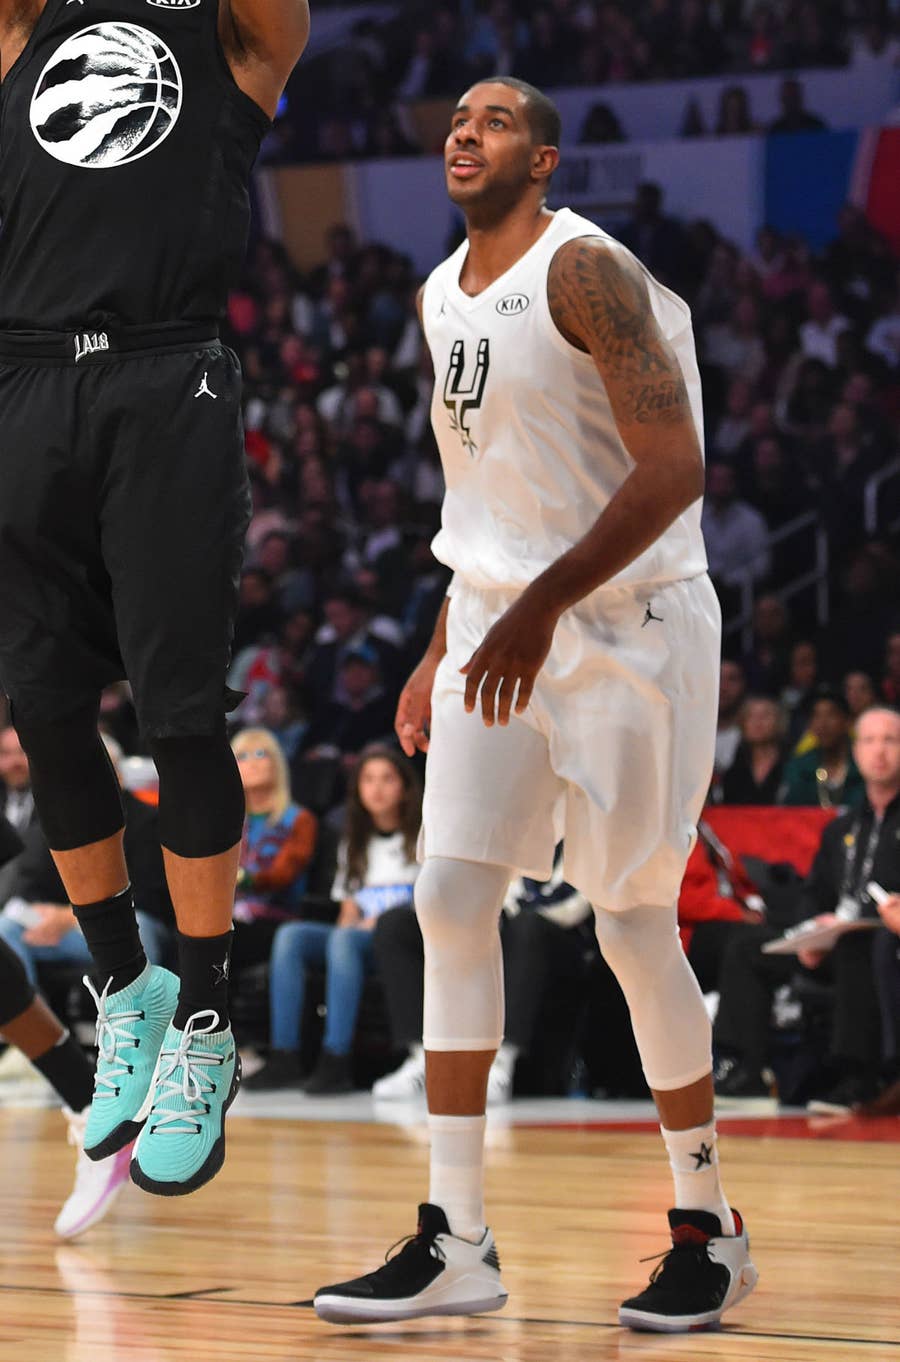 SoleWatch: Every Sneaker Worn in the 2018 NBA Rising Stars Game